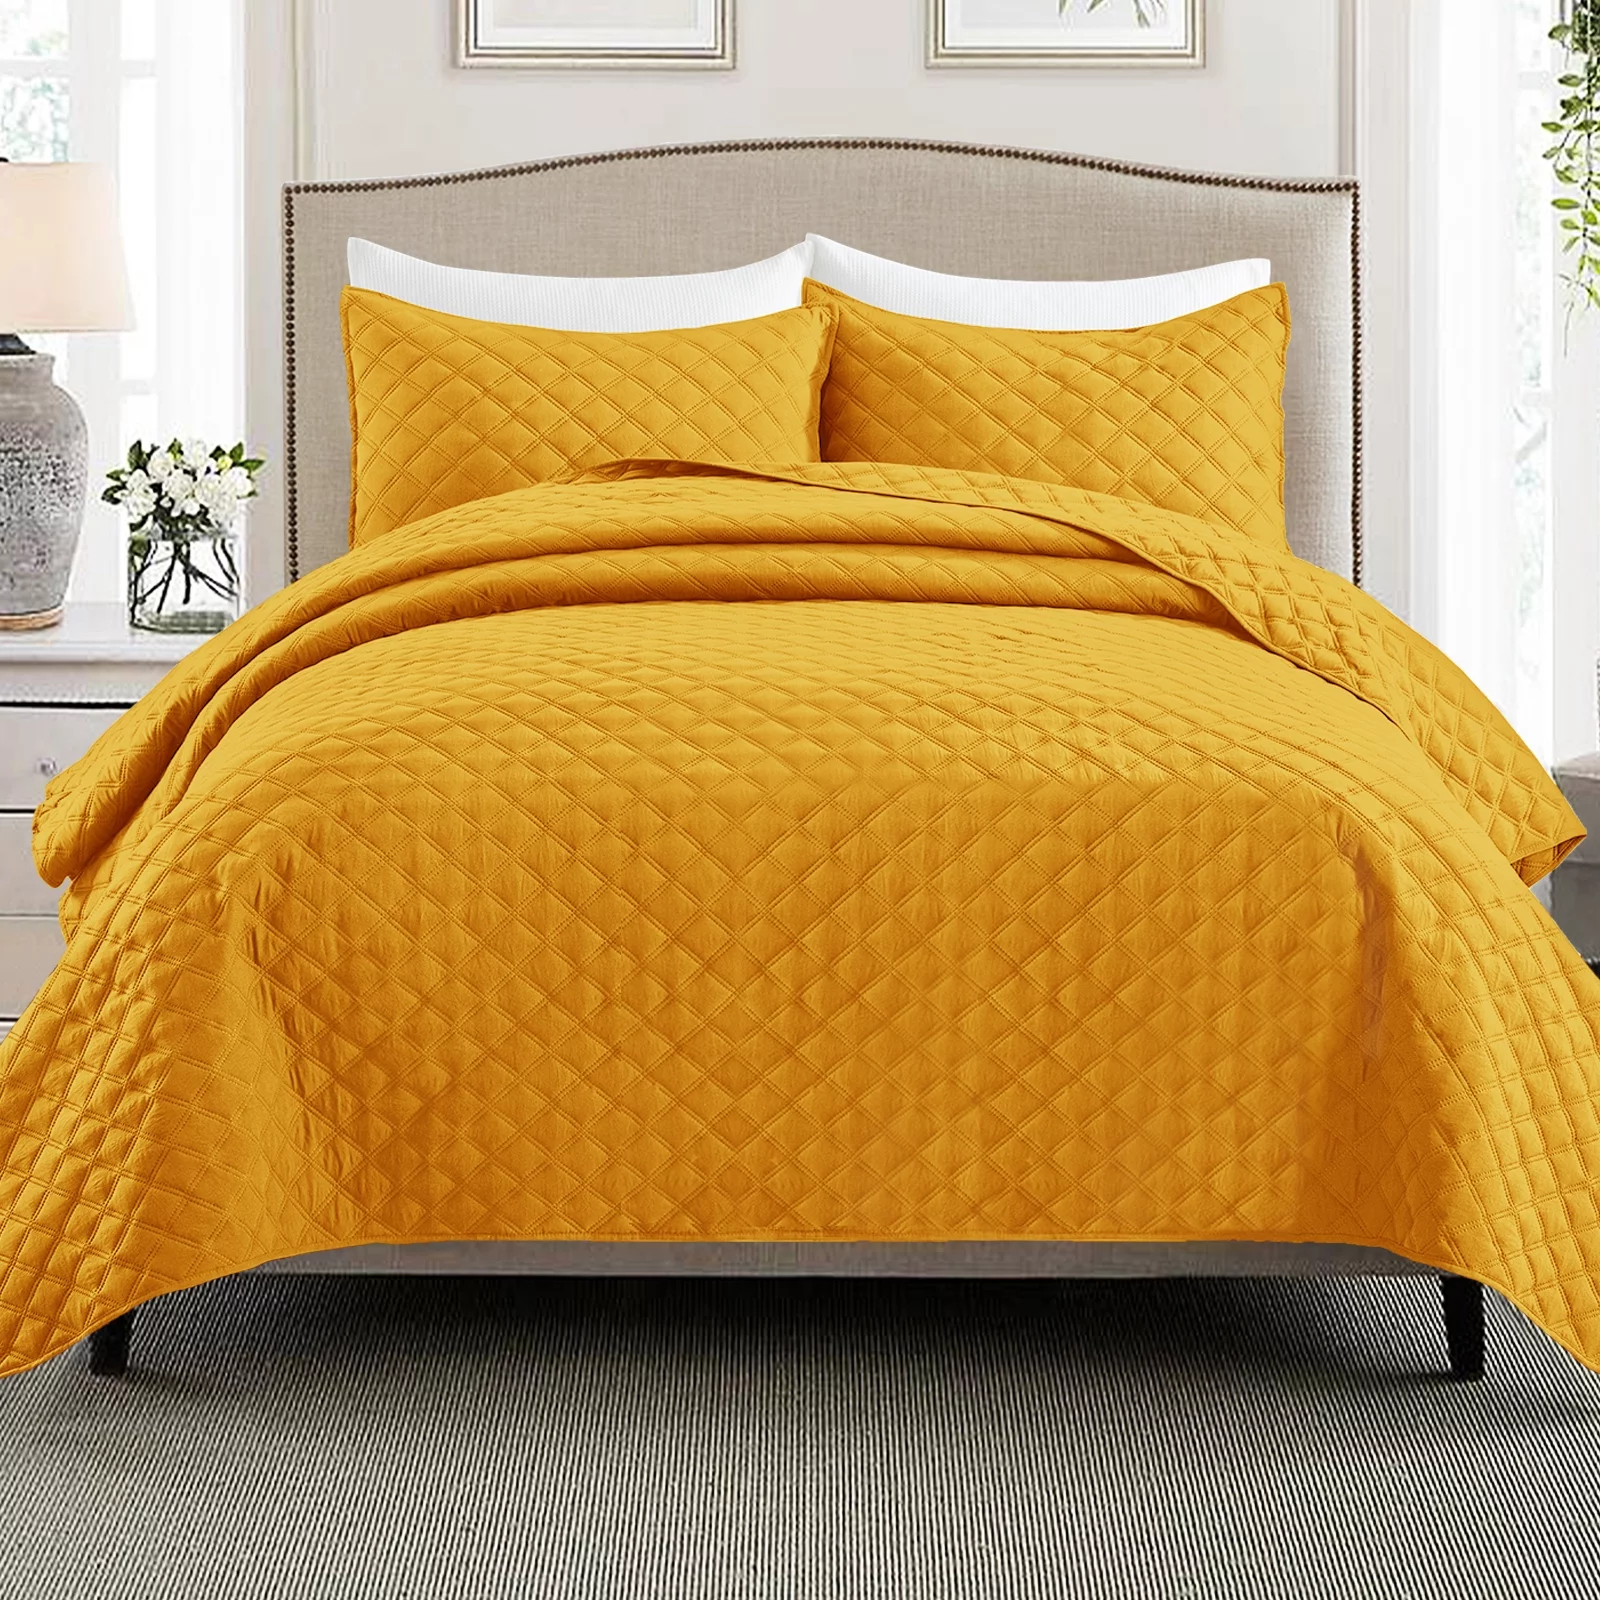 Exclusivo Mezcla 3-Piece Yellow Queen Size Quilt Set, Box Pattern Ultrasonic Lightweight and Soft Quilts/Bedspreads/Coverlets/Bedding Set (1 Quilt, 2 Pillow Shams) for All Seasons